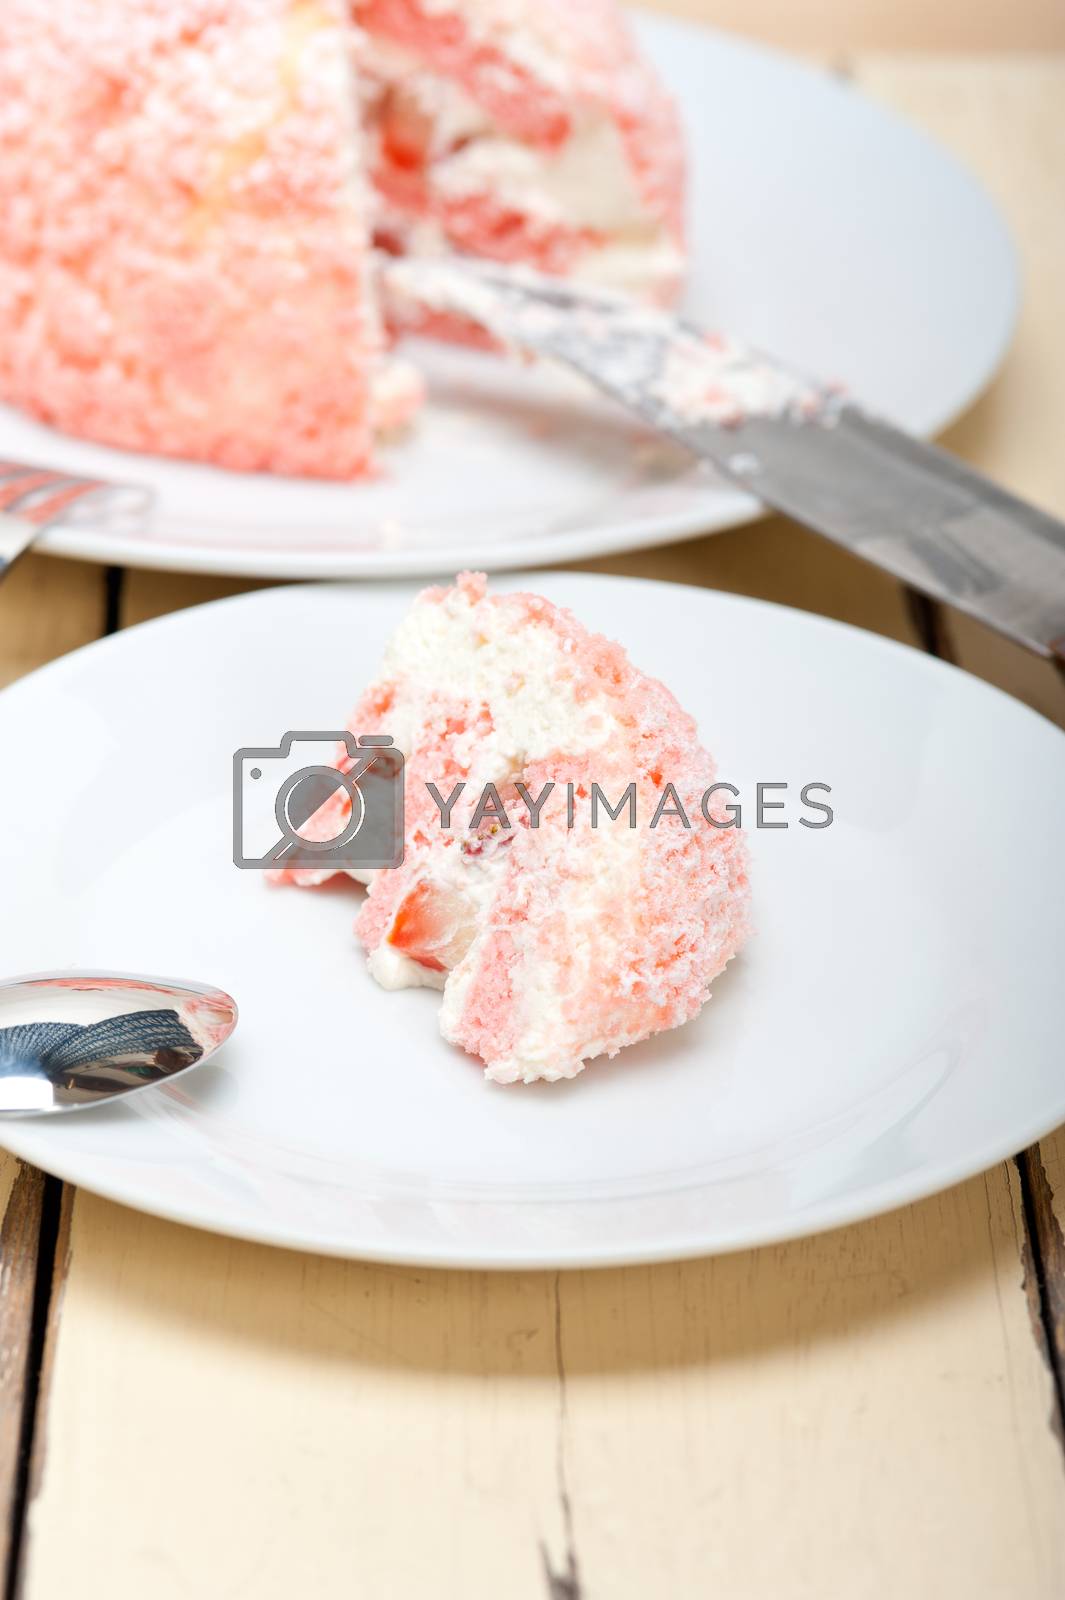 Royalty free image of fresh strawberry and whipped cream dessert by keko64